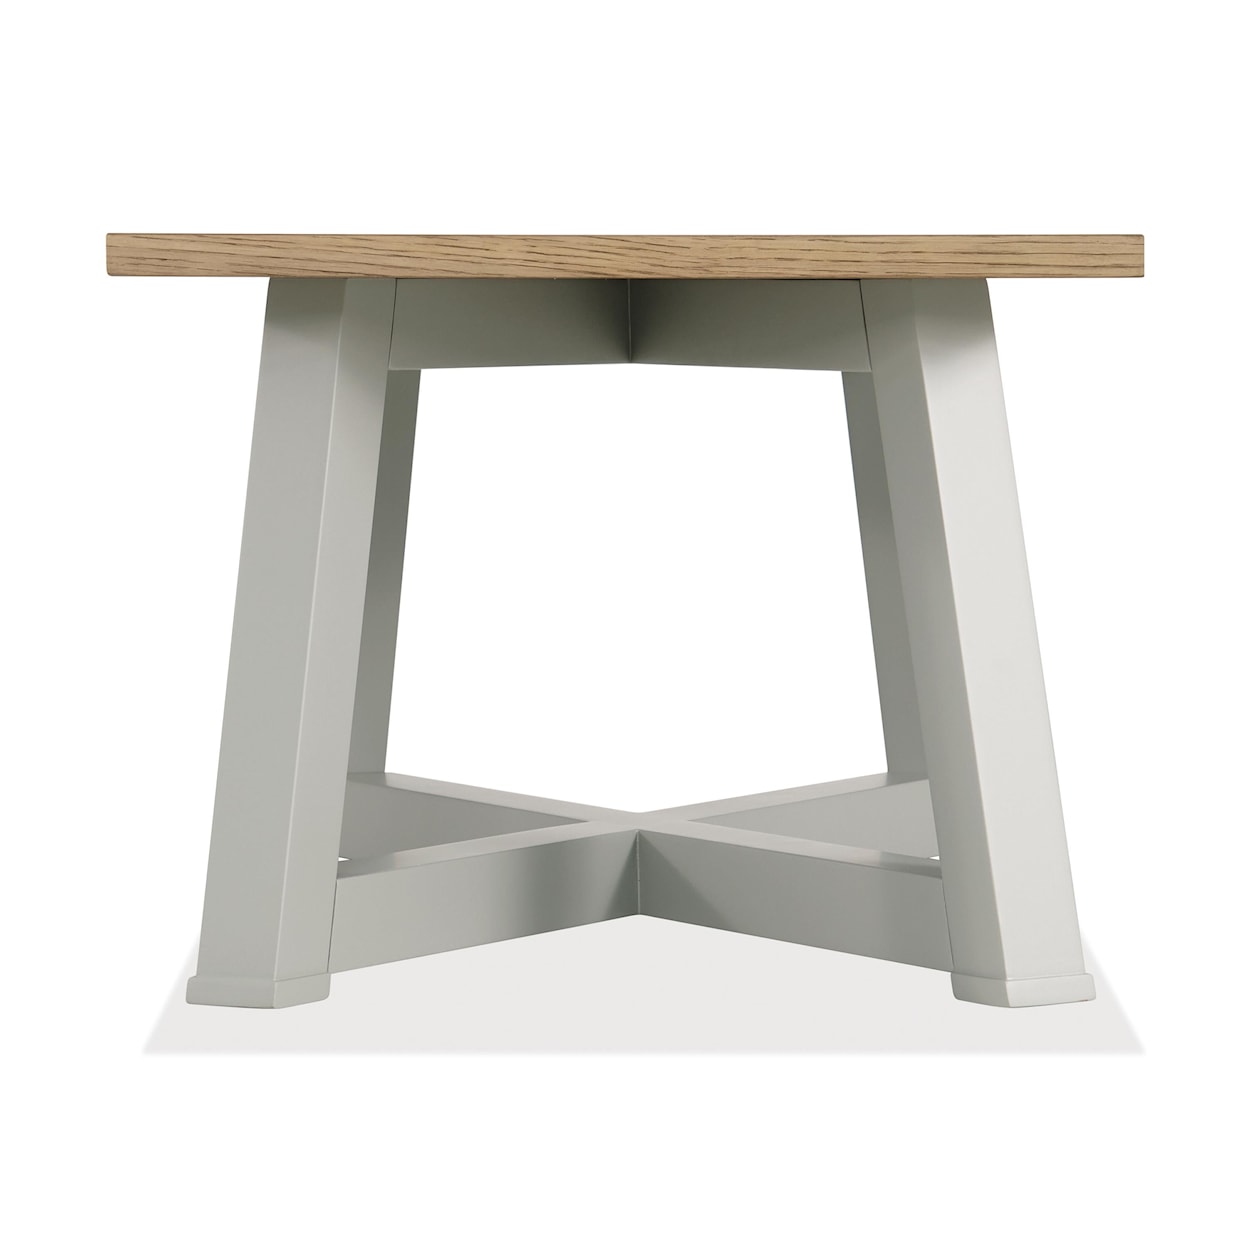 Riverside Furniture Beaufort Small Cocktail Table